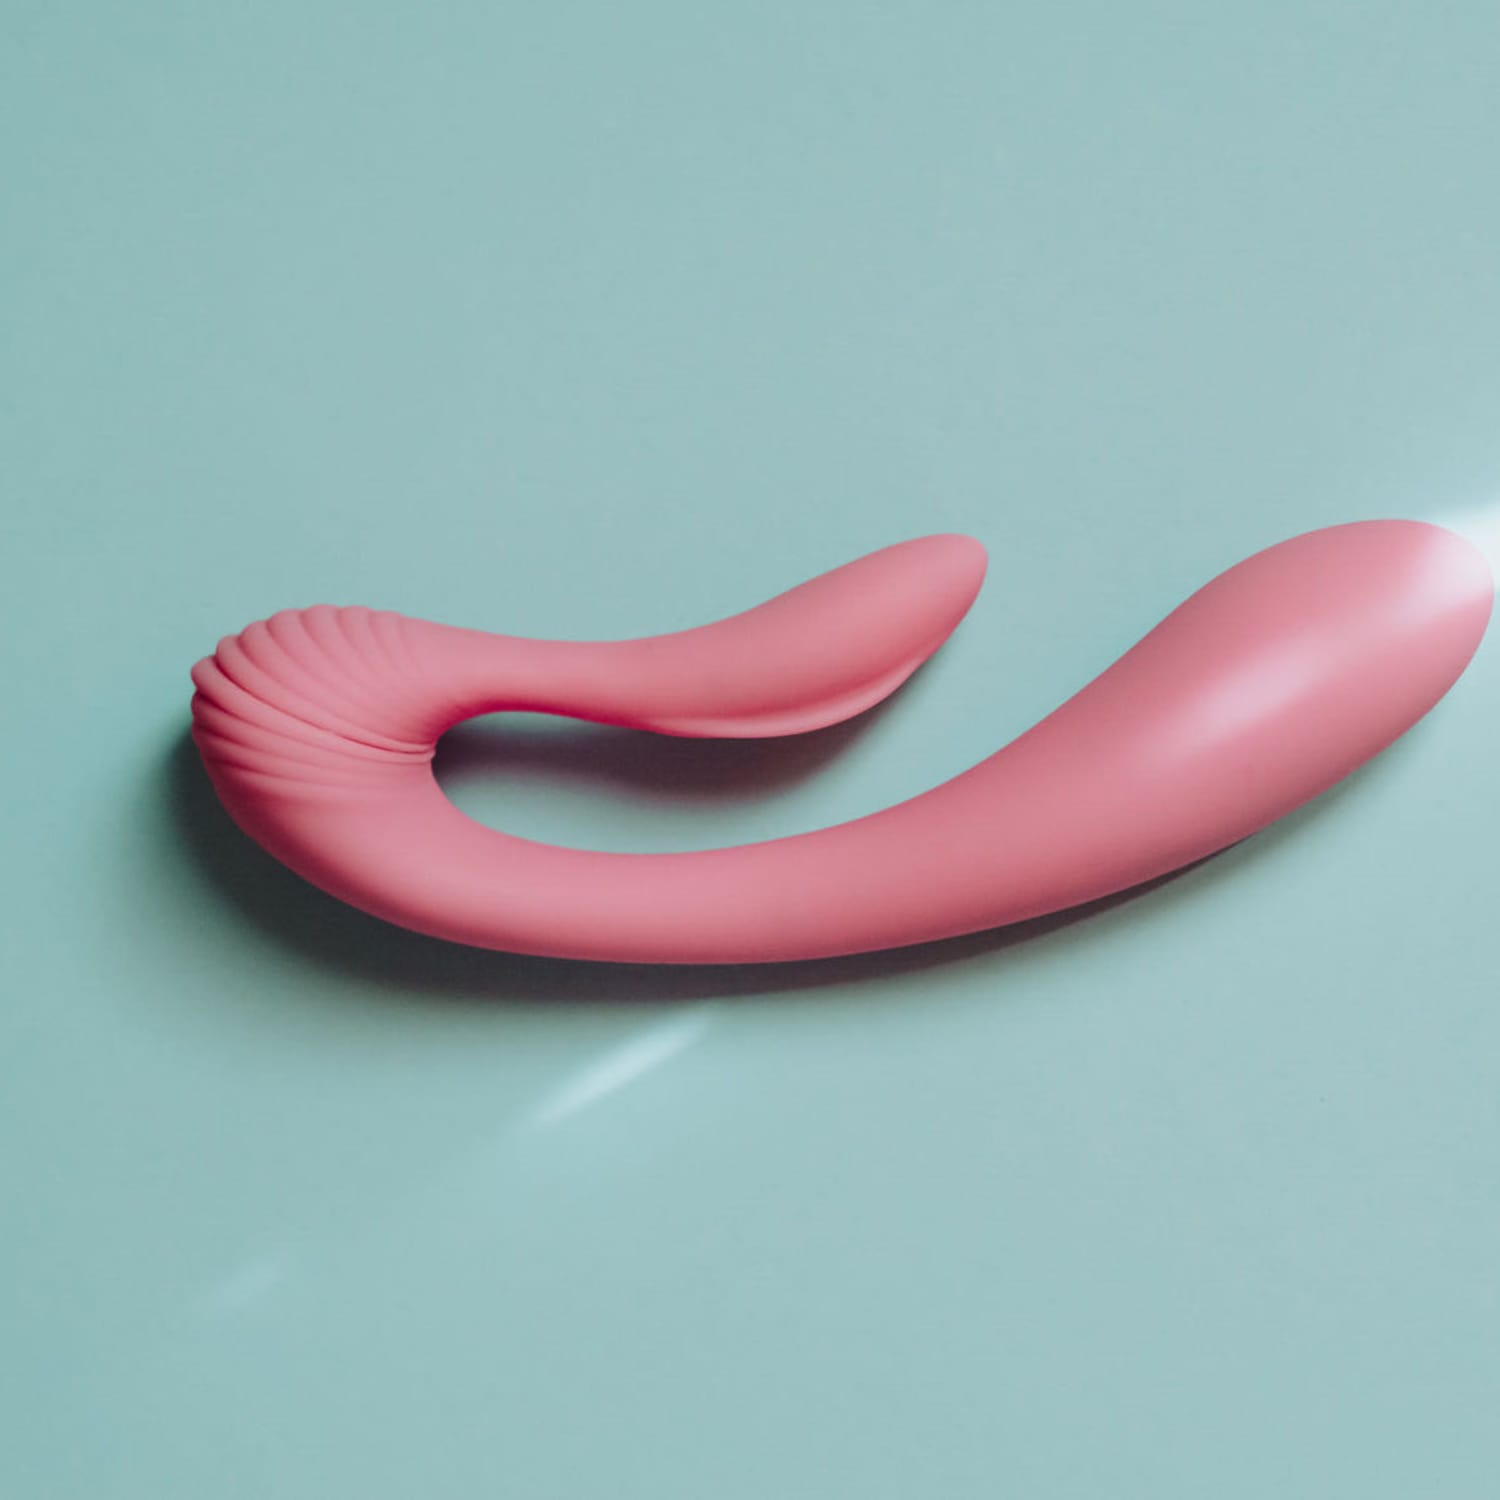 How to Wash Dildos and Sex Toys, According to Experts Apartment Therapy image